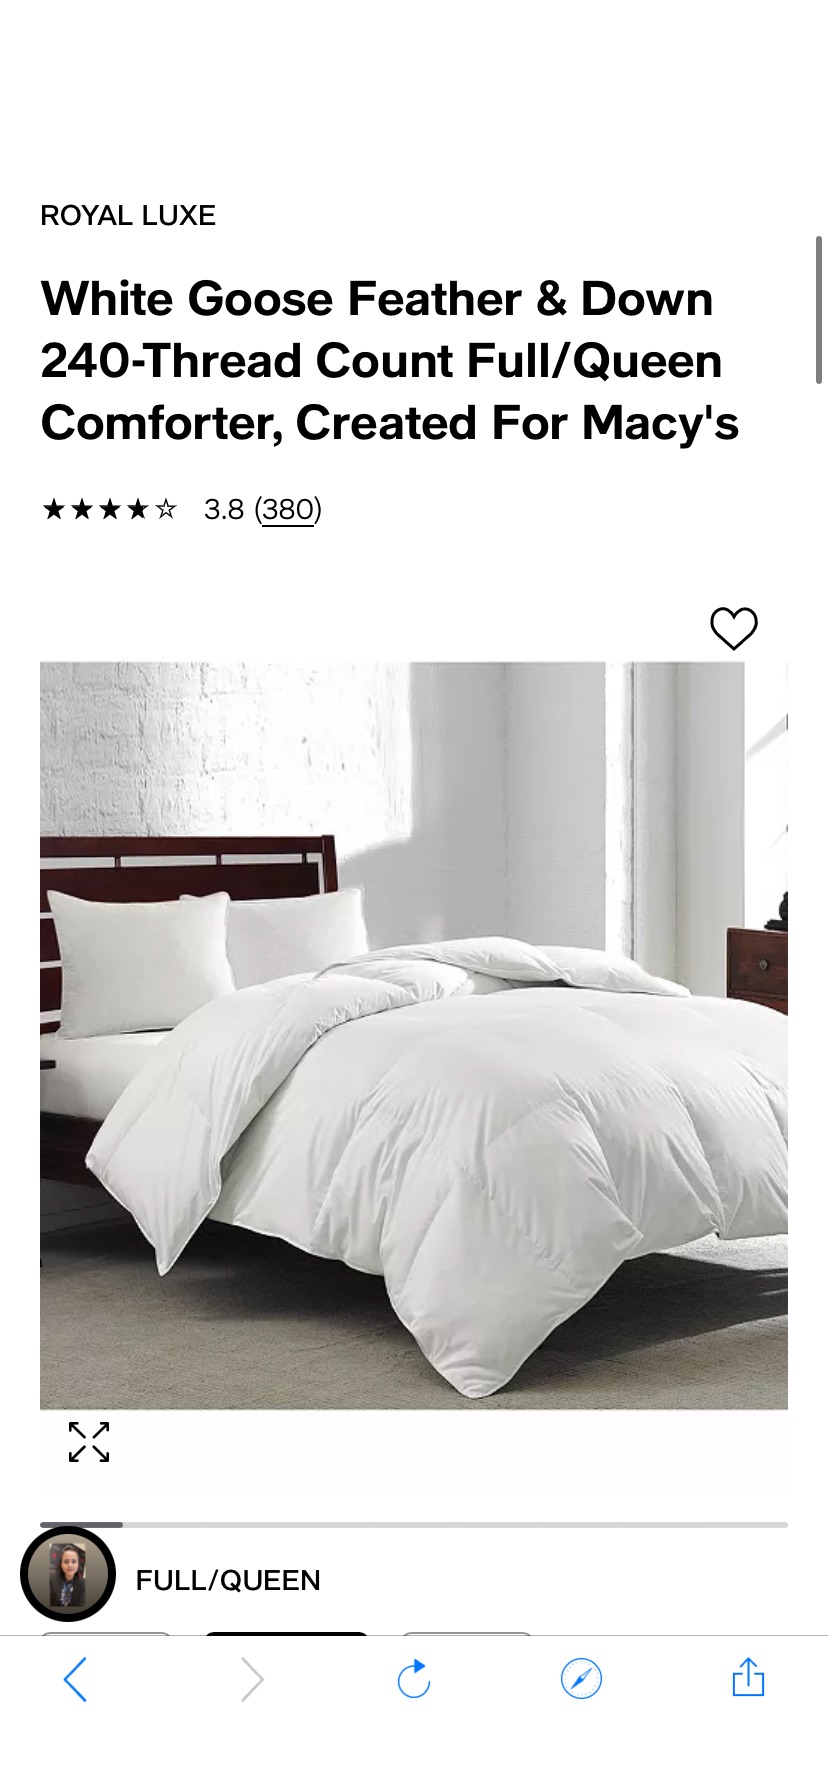 Royal Luxe White Goose Feather & Down 240-Thread Count Twin 羽絨被 - Macy's